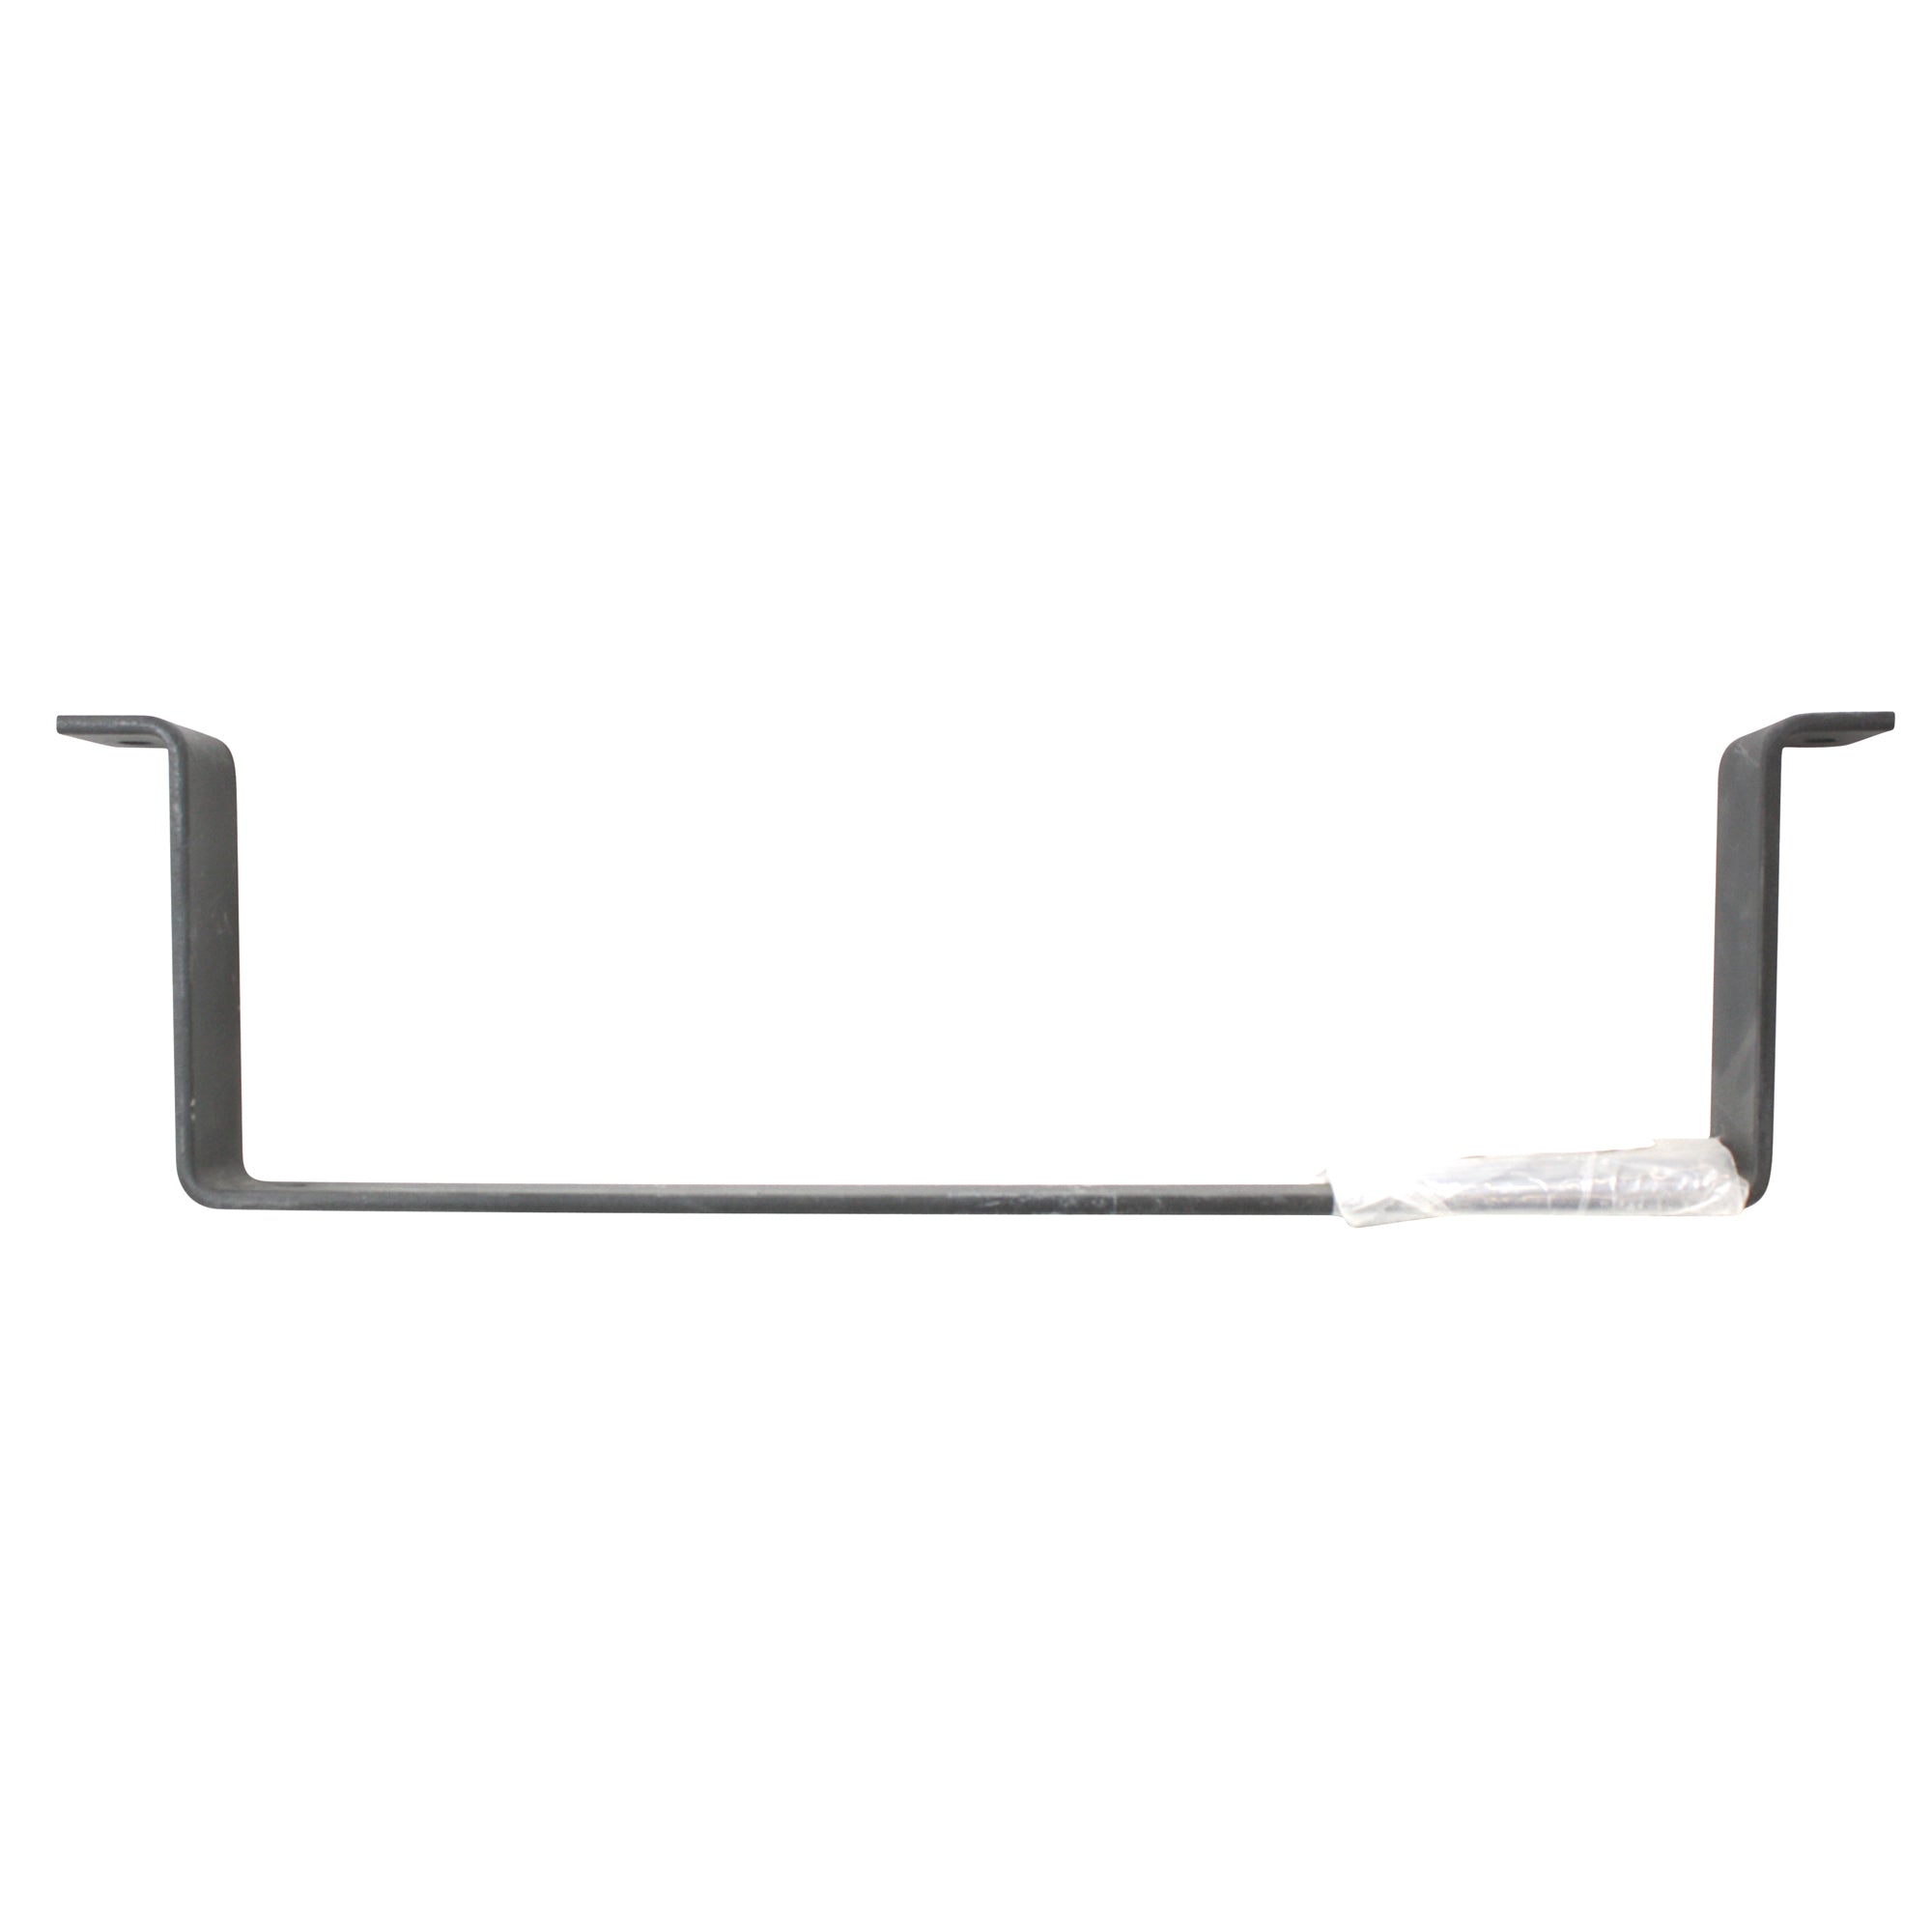 B-Line Systems, COOPER B-LINE SB2261806FB FLOOR SUPPORT BRACKET FOR 18" CABLE RUNWAY